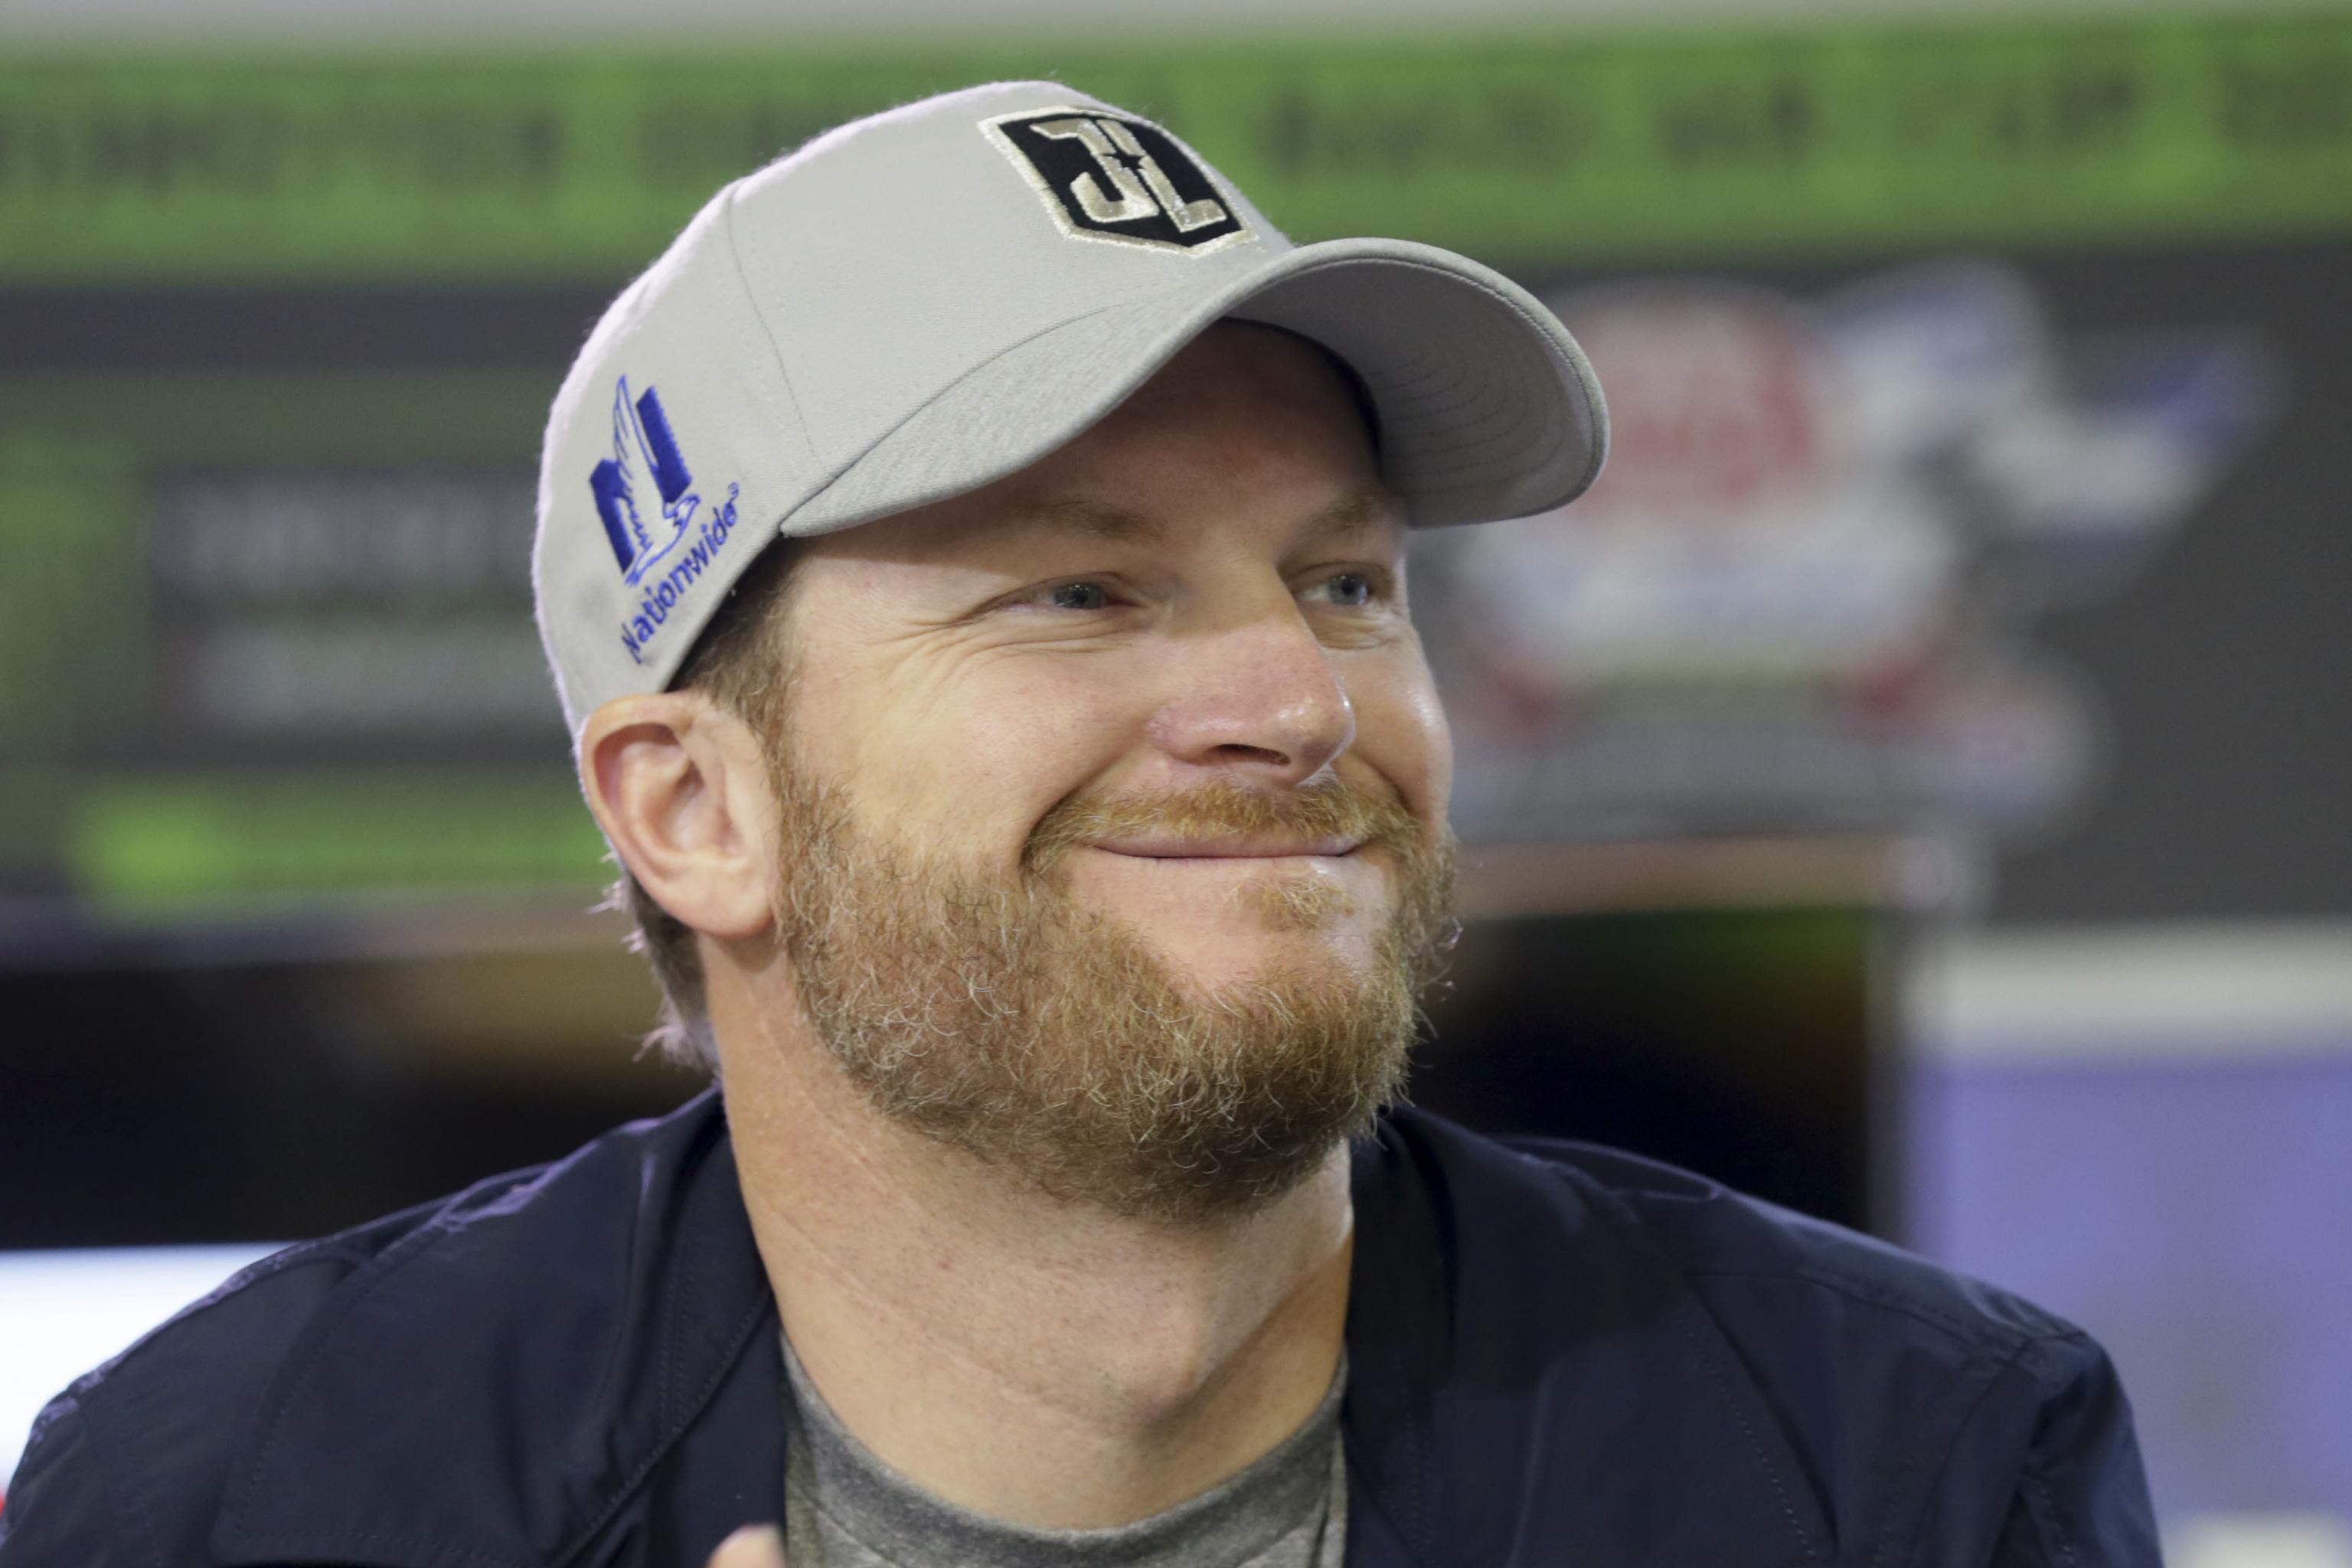 Dale Earnhardt Jr. and the NASCAR Hall of Fame Class of 2021 Announced